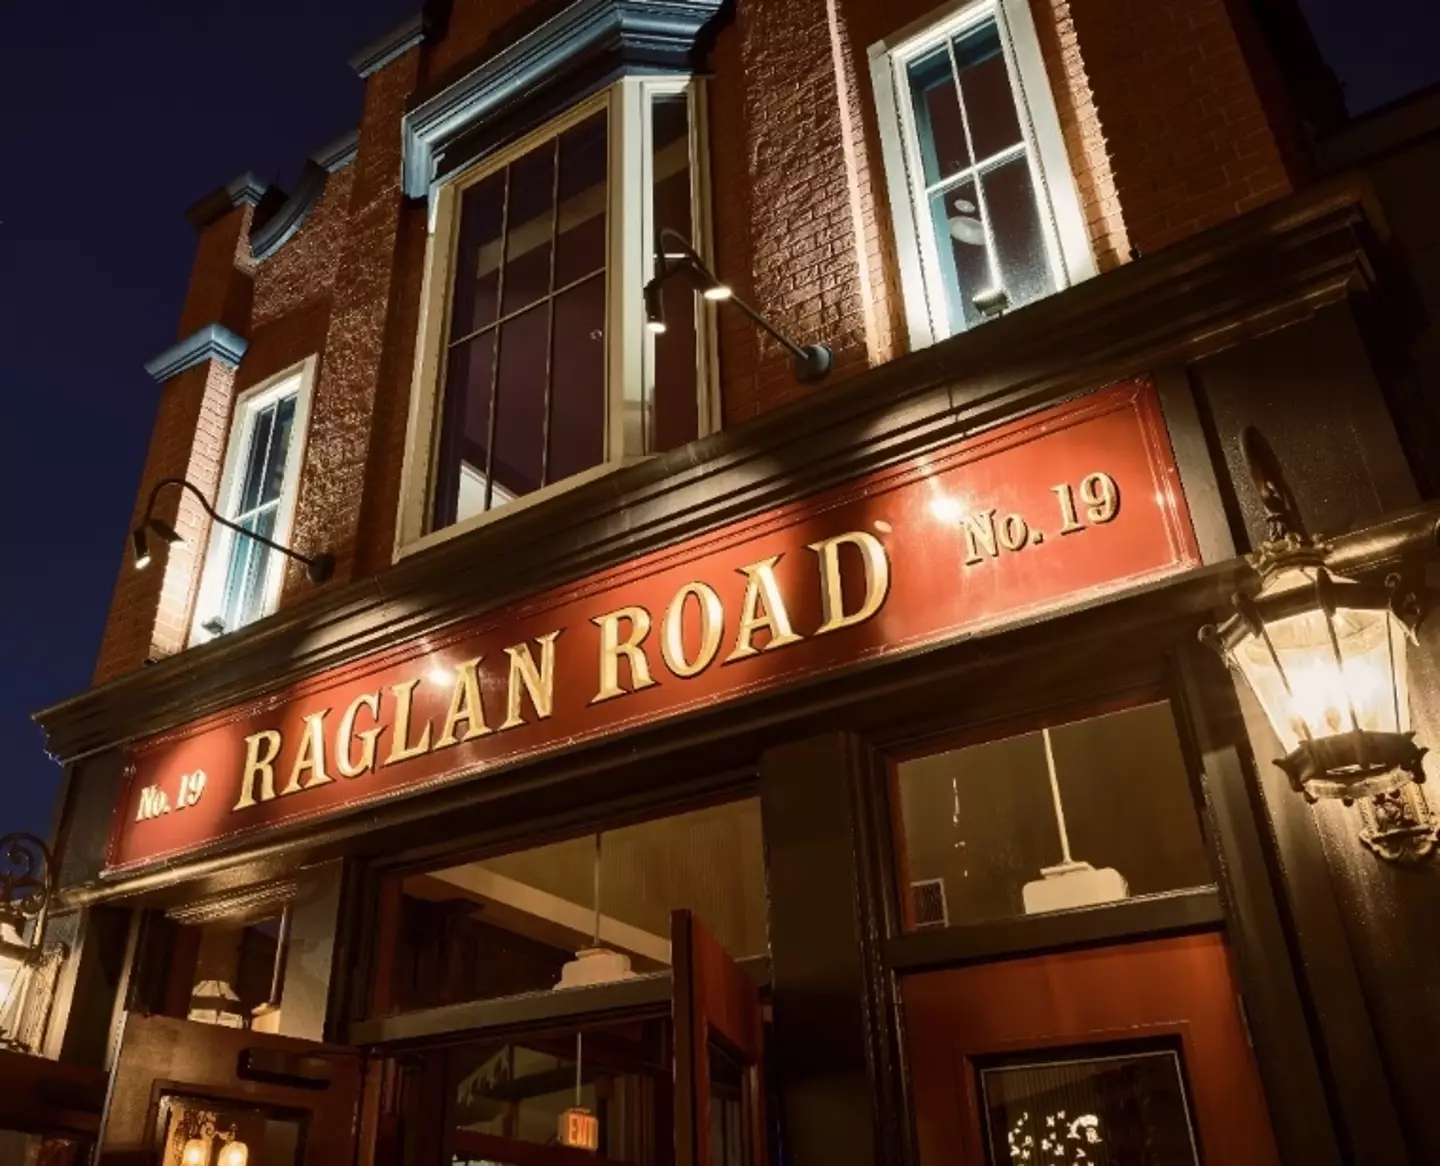 The lawsuit claimed the doctor had an allergic reaction after eating at the Raglan Road Pub at Disney World.